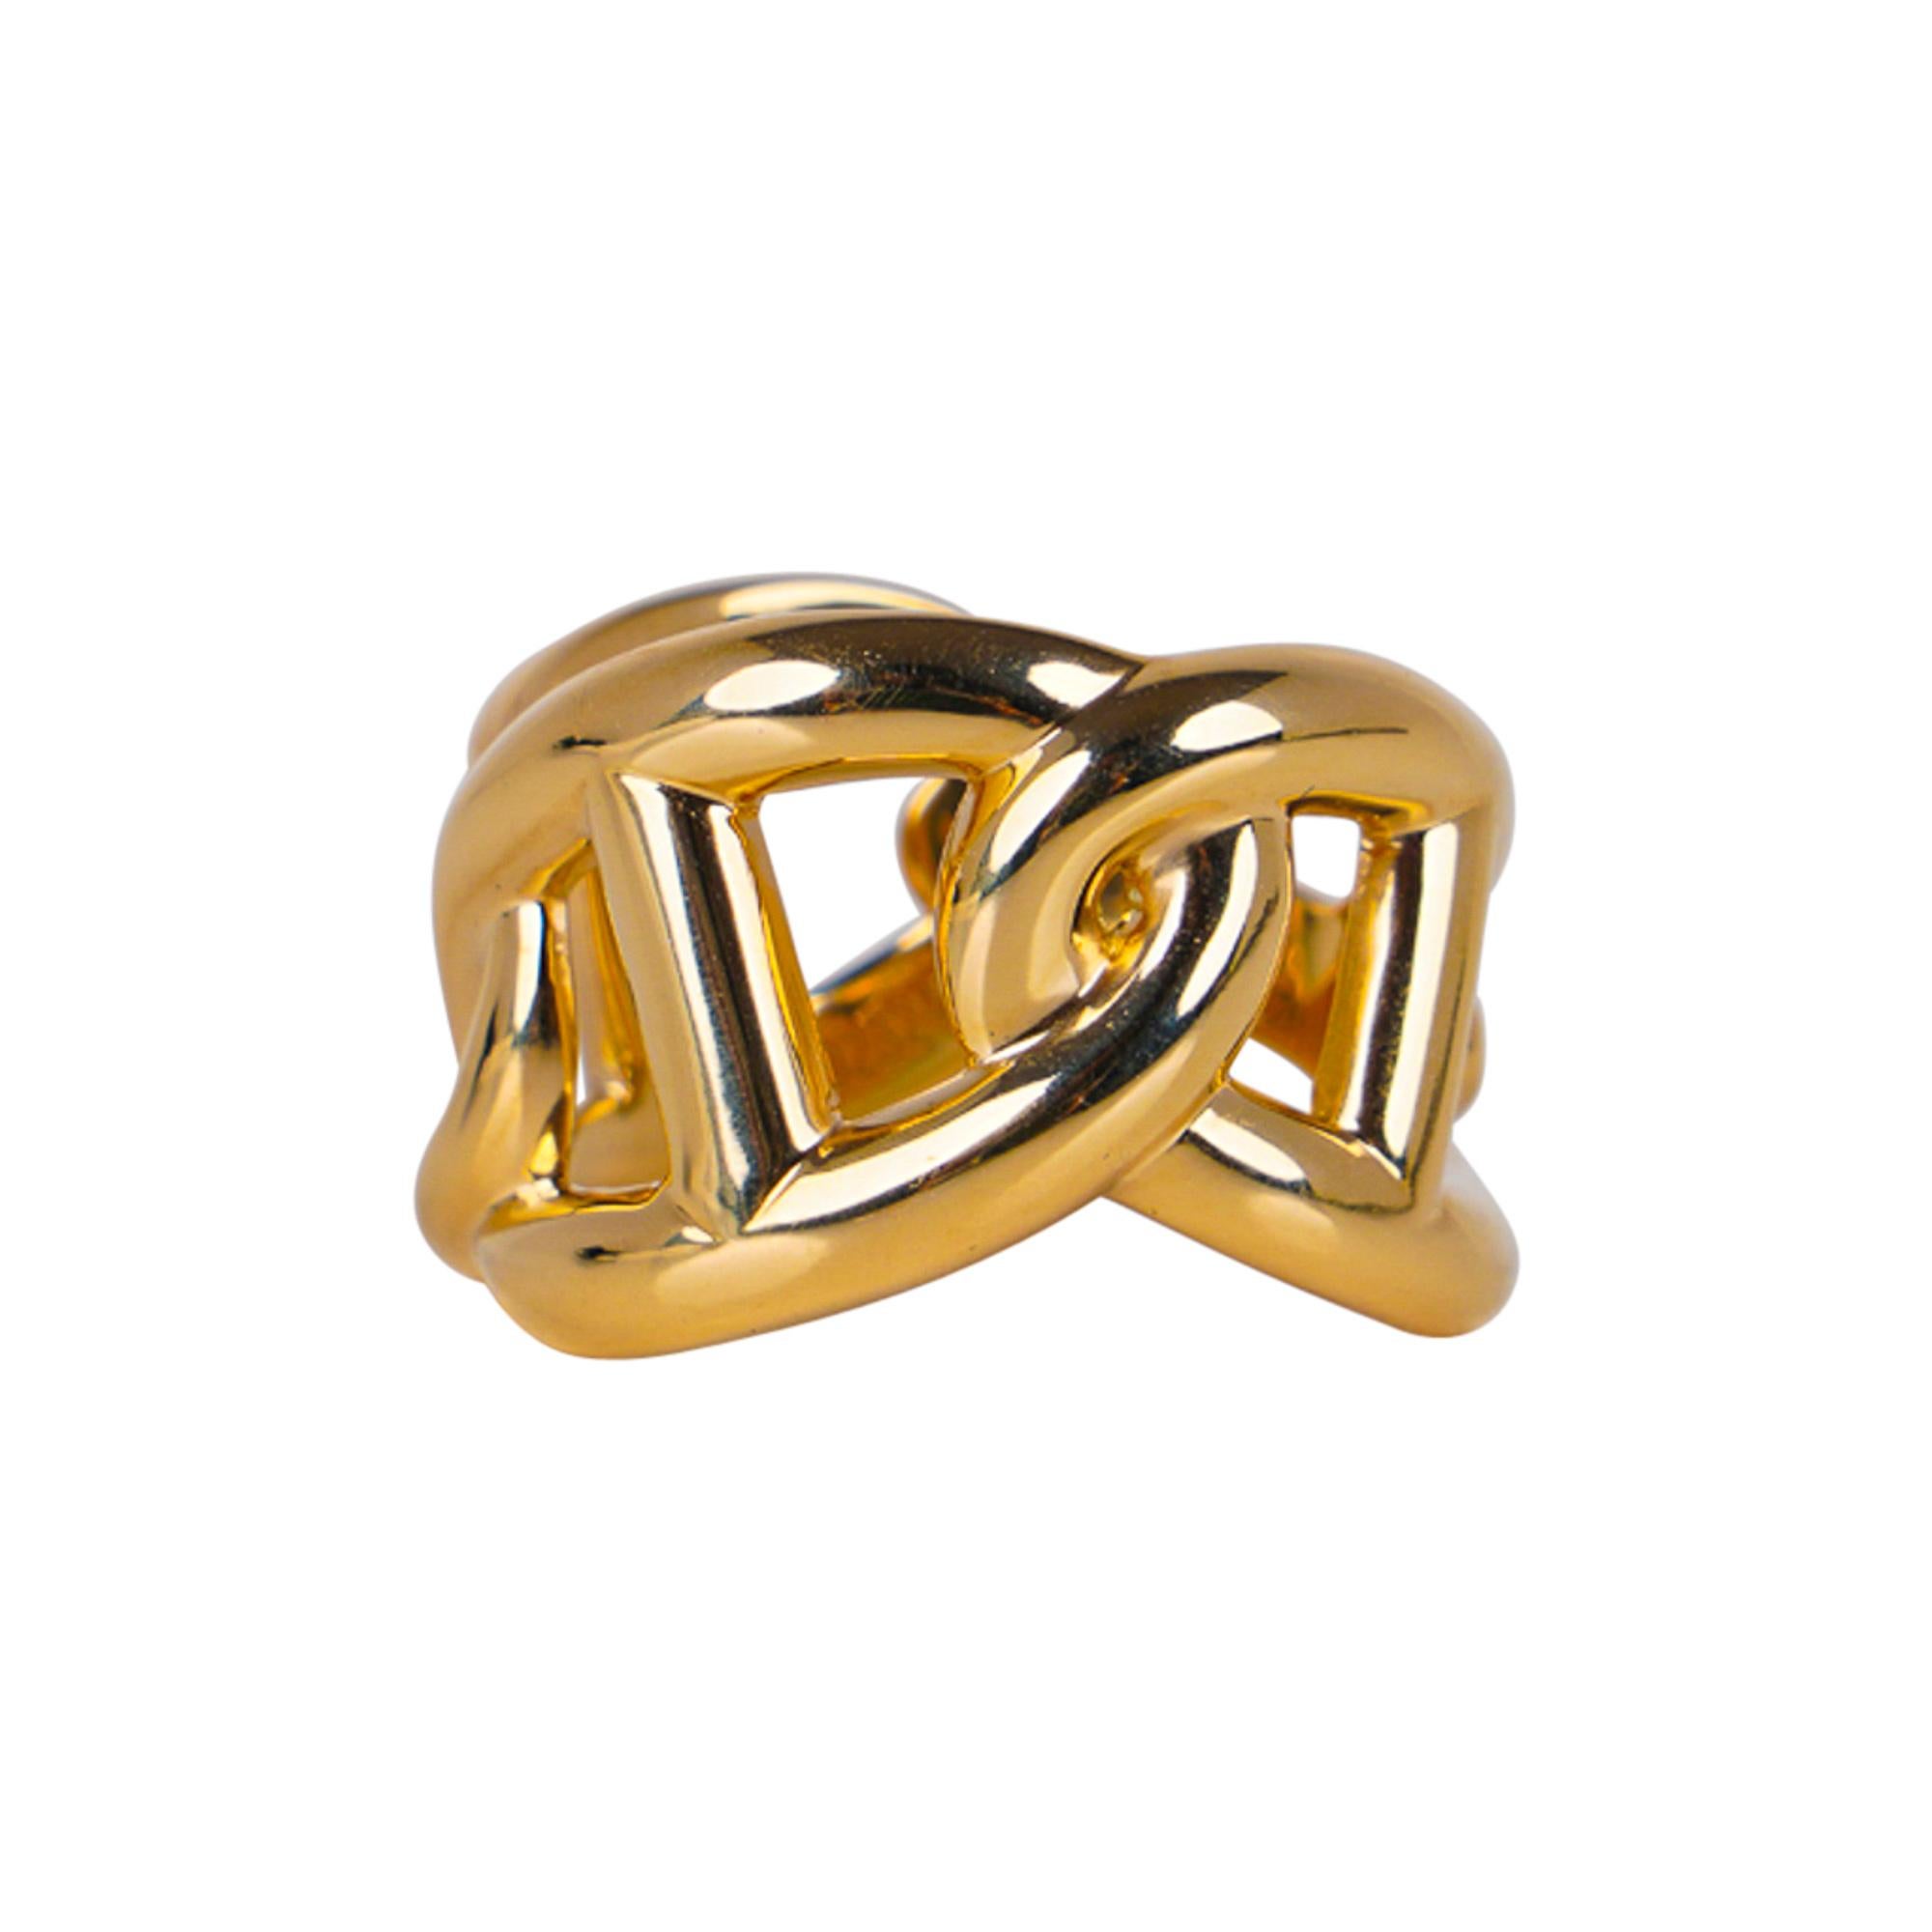 Guaranteed authentic Hermes 18K Yellow Gold Chaine d'Ancre ring.
Three iconic Hermes links placed at angles. Rare to find.
A beautiful and timeless piece.
NEW or NEVER WORN.
final sale

SIZE 51

CONDITION:
NEW or NEVER WORN